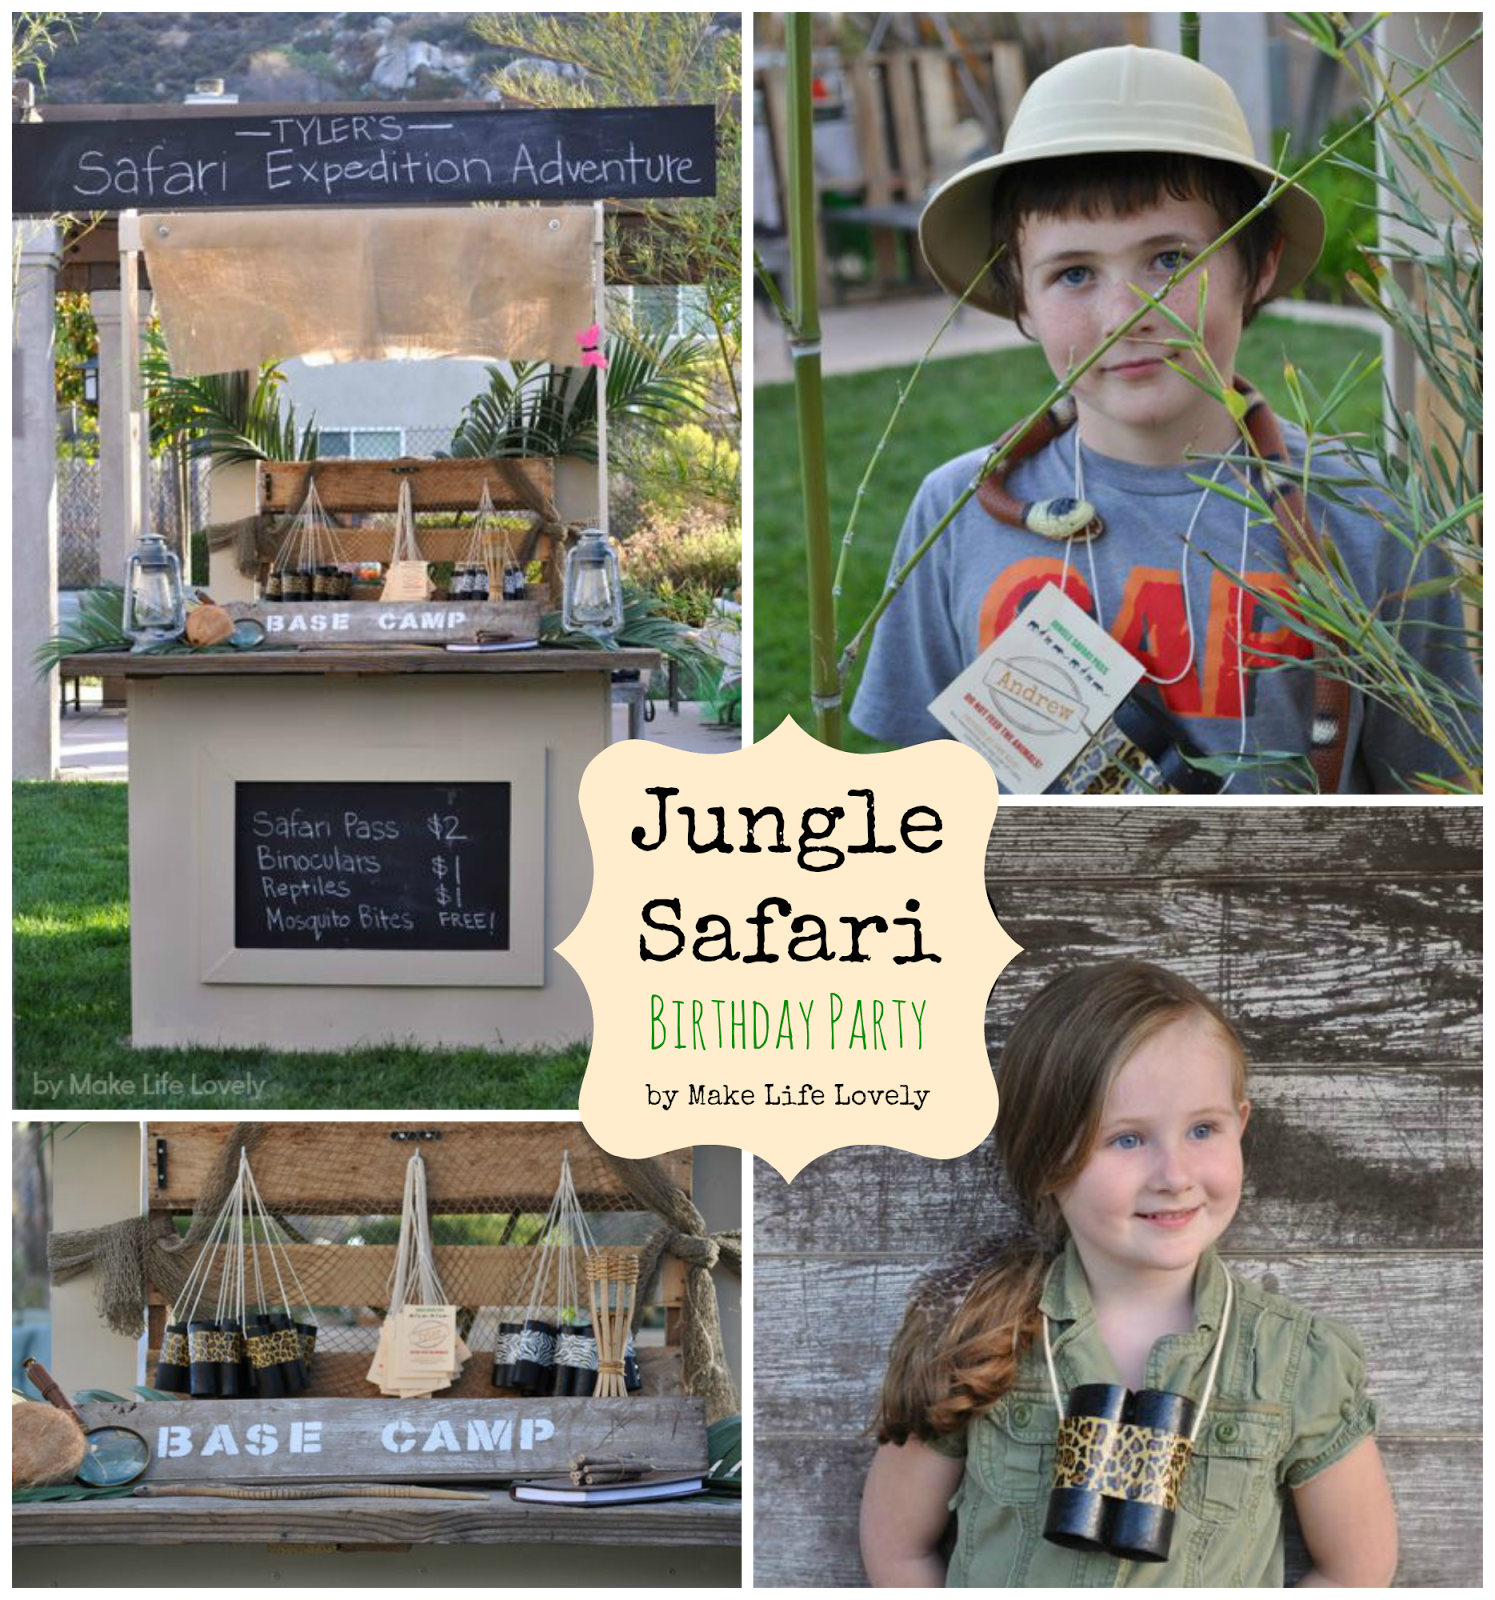 Jungle Party Ideas and DIY Decor - Party Ideas